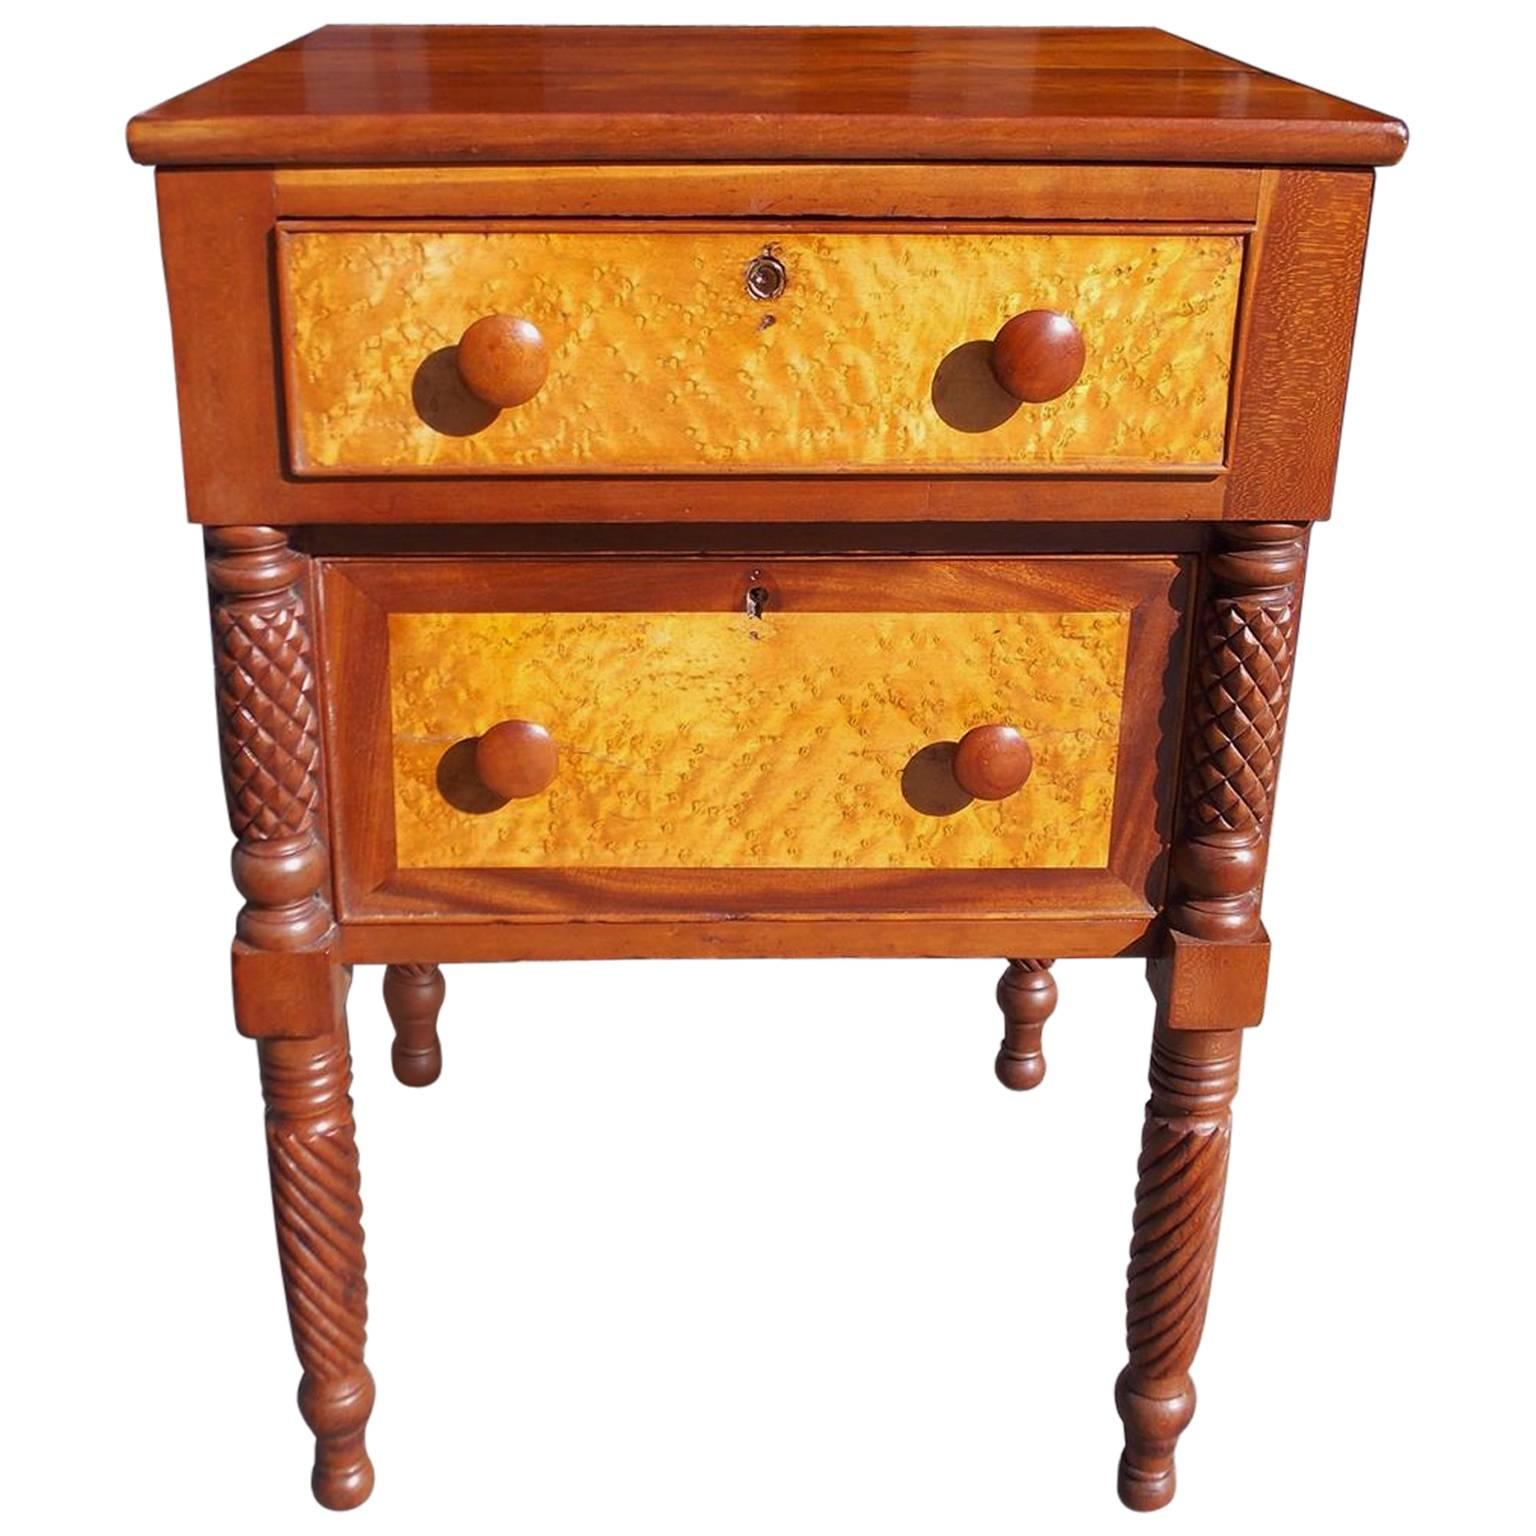 American Cherry and Birdseye Maple Stand, Circa 1815 For Sale